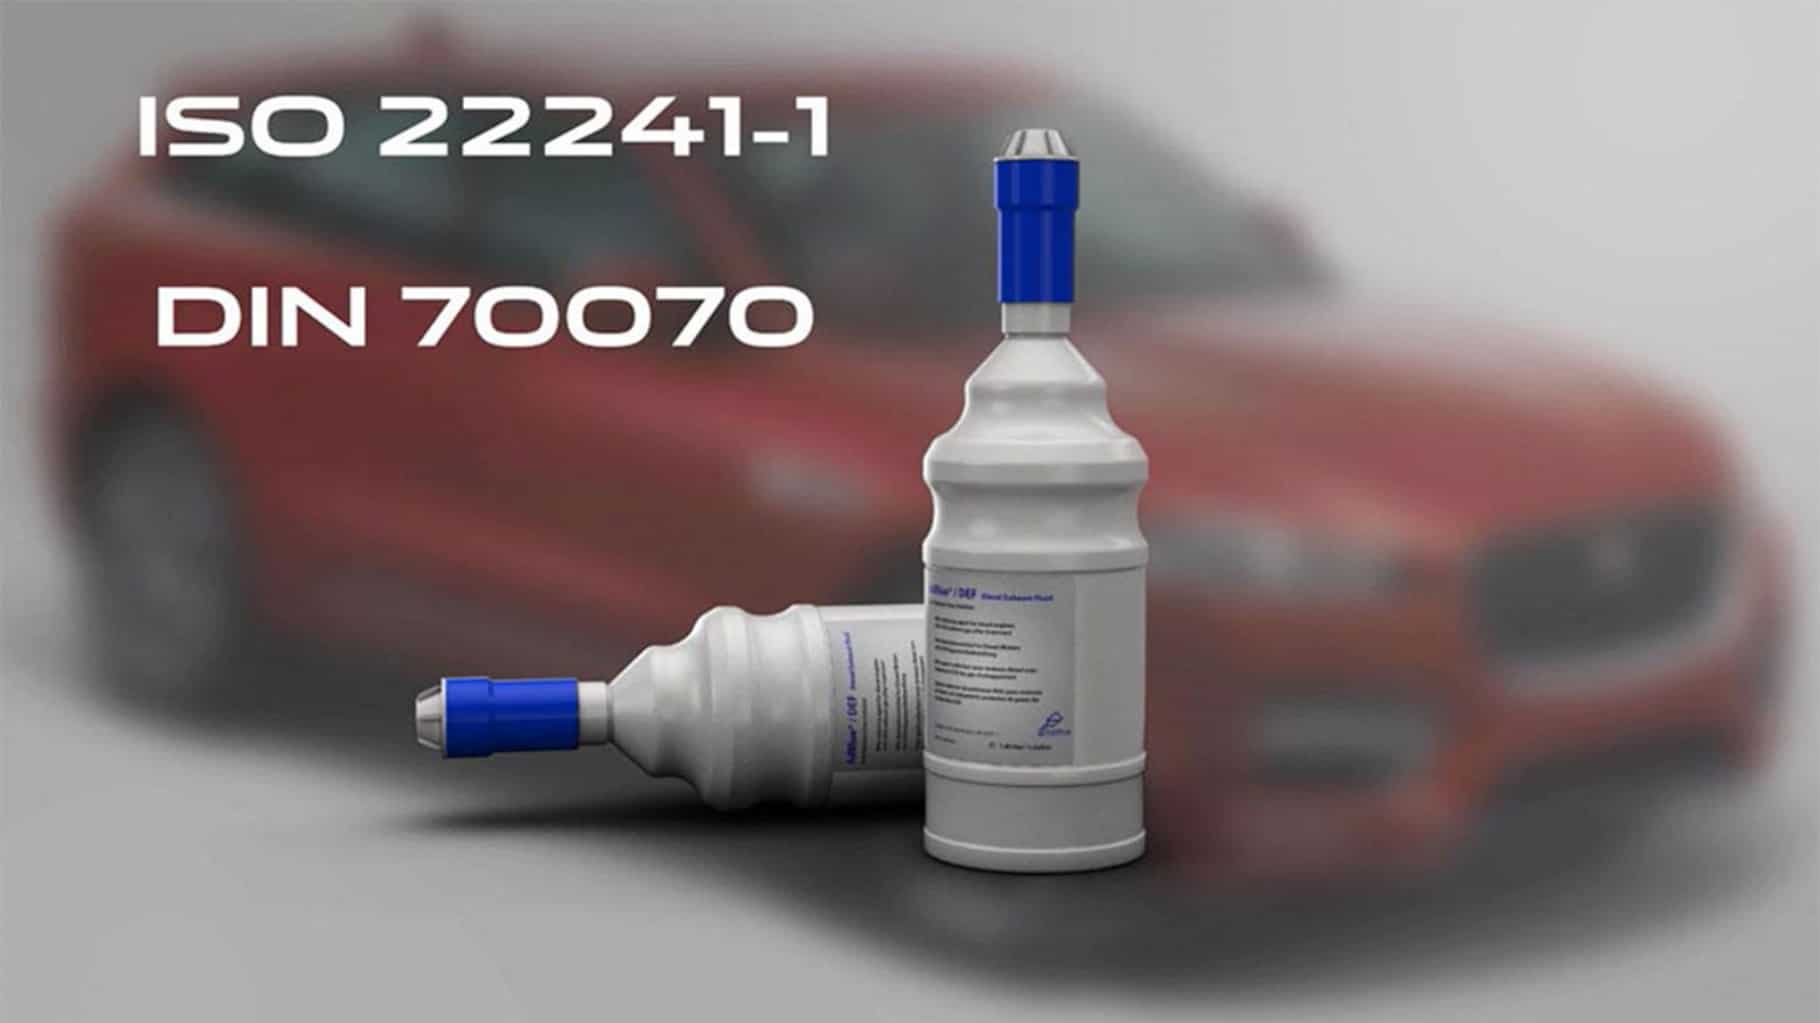 Jaguar F-PACE's Diesel Exhaust Fluid, also know as AdBlue, AUS 32 or ARLA 32 information video.